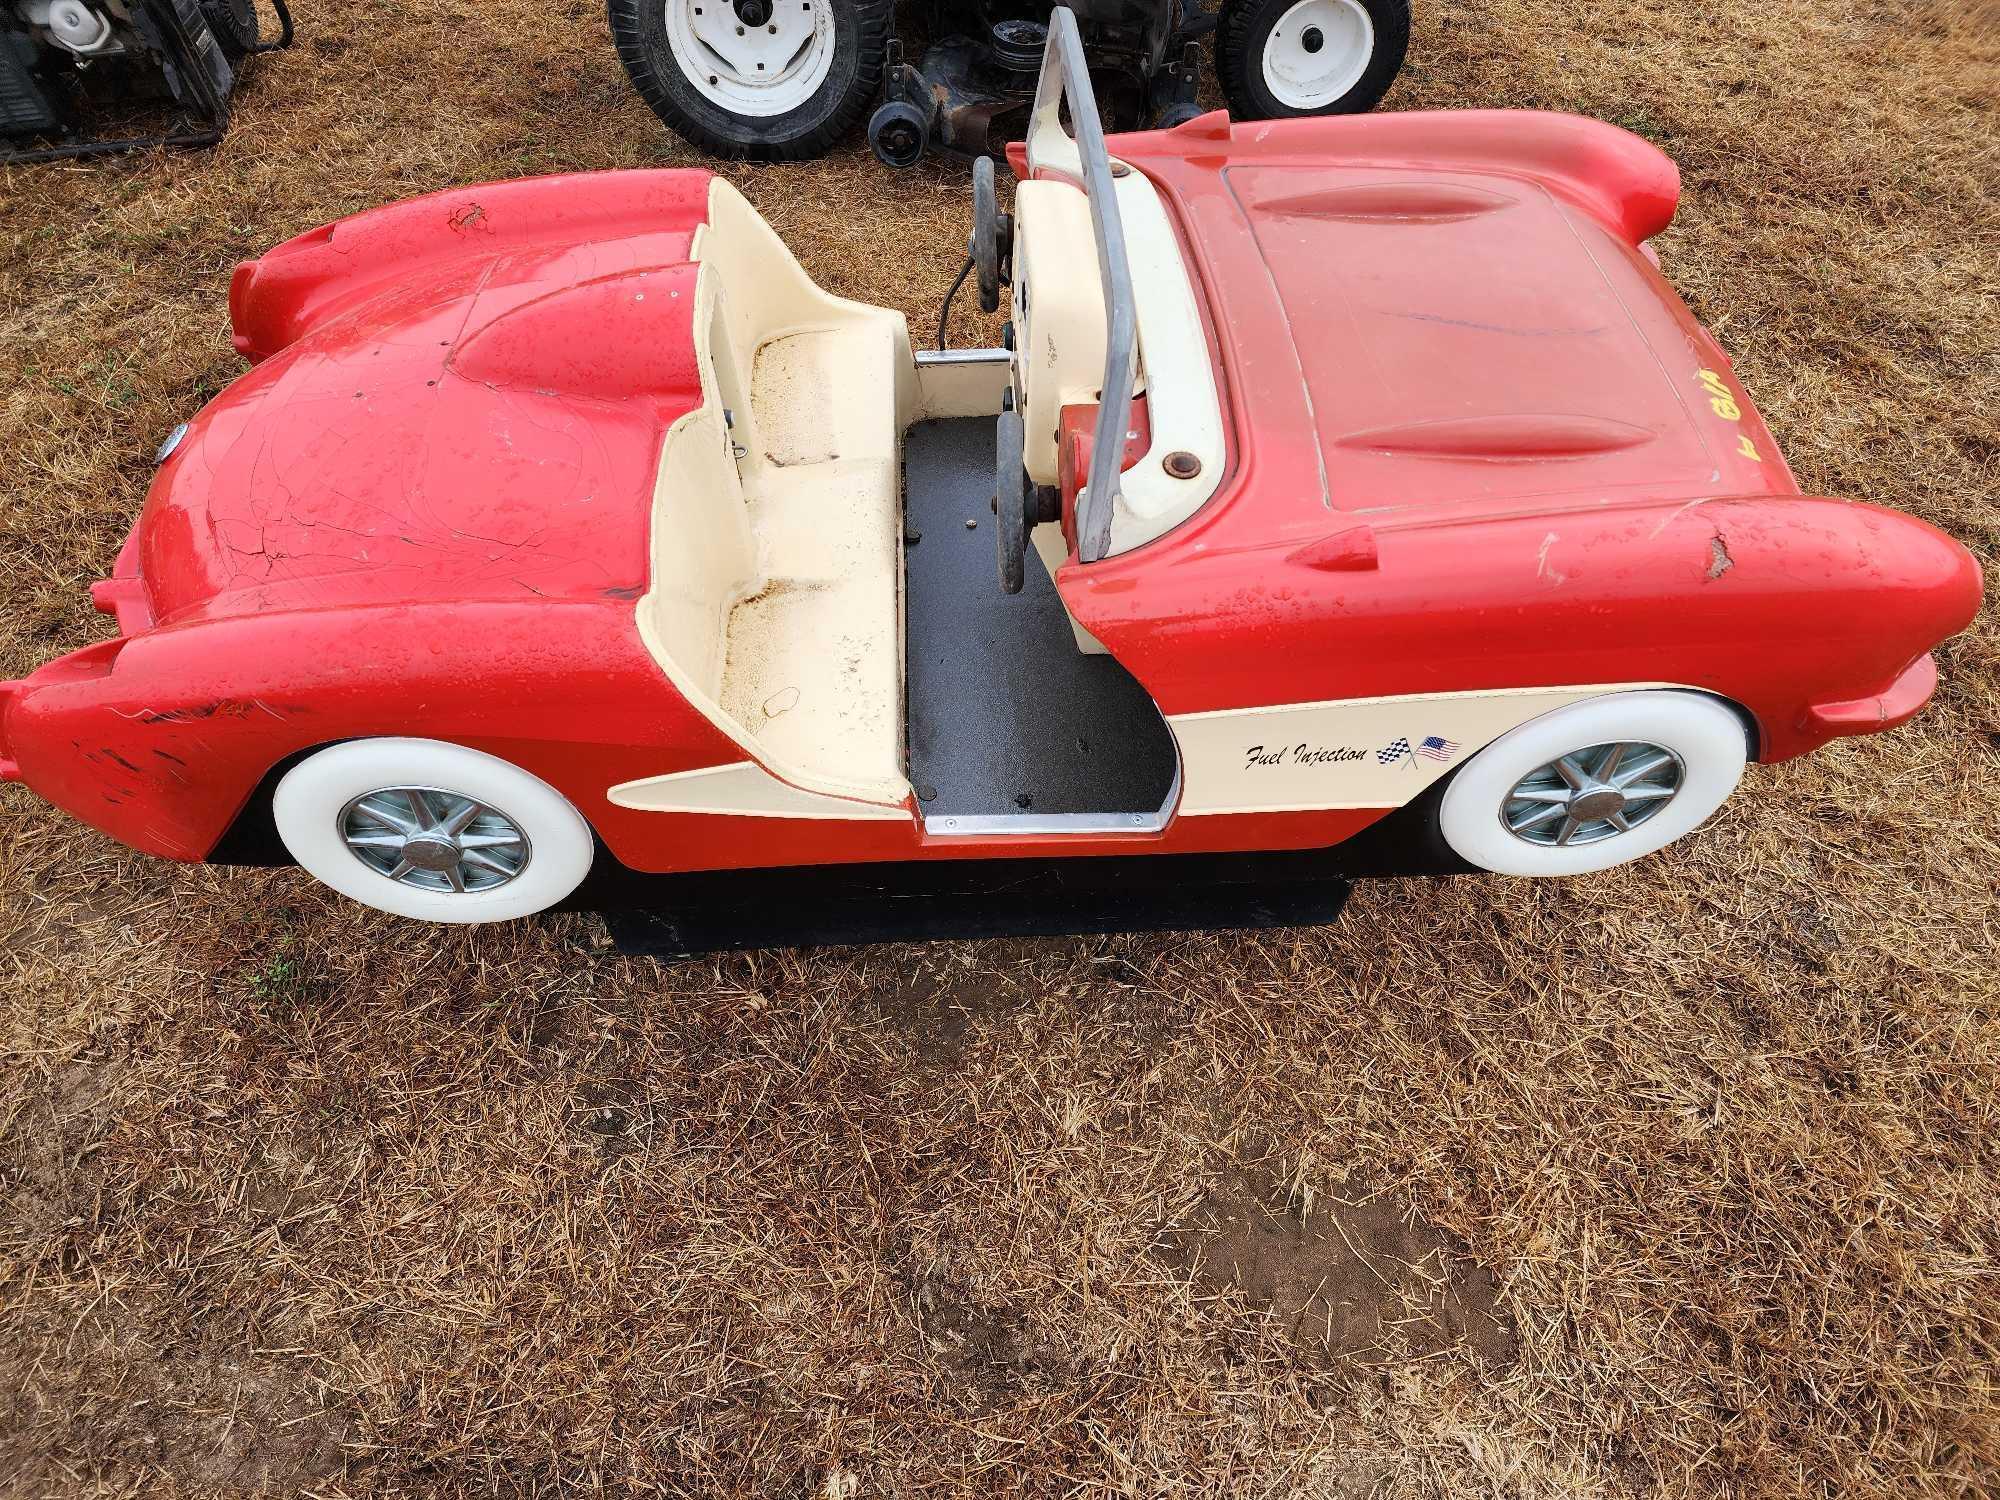 Red Corvette Coin Operated Kiddie Ride